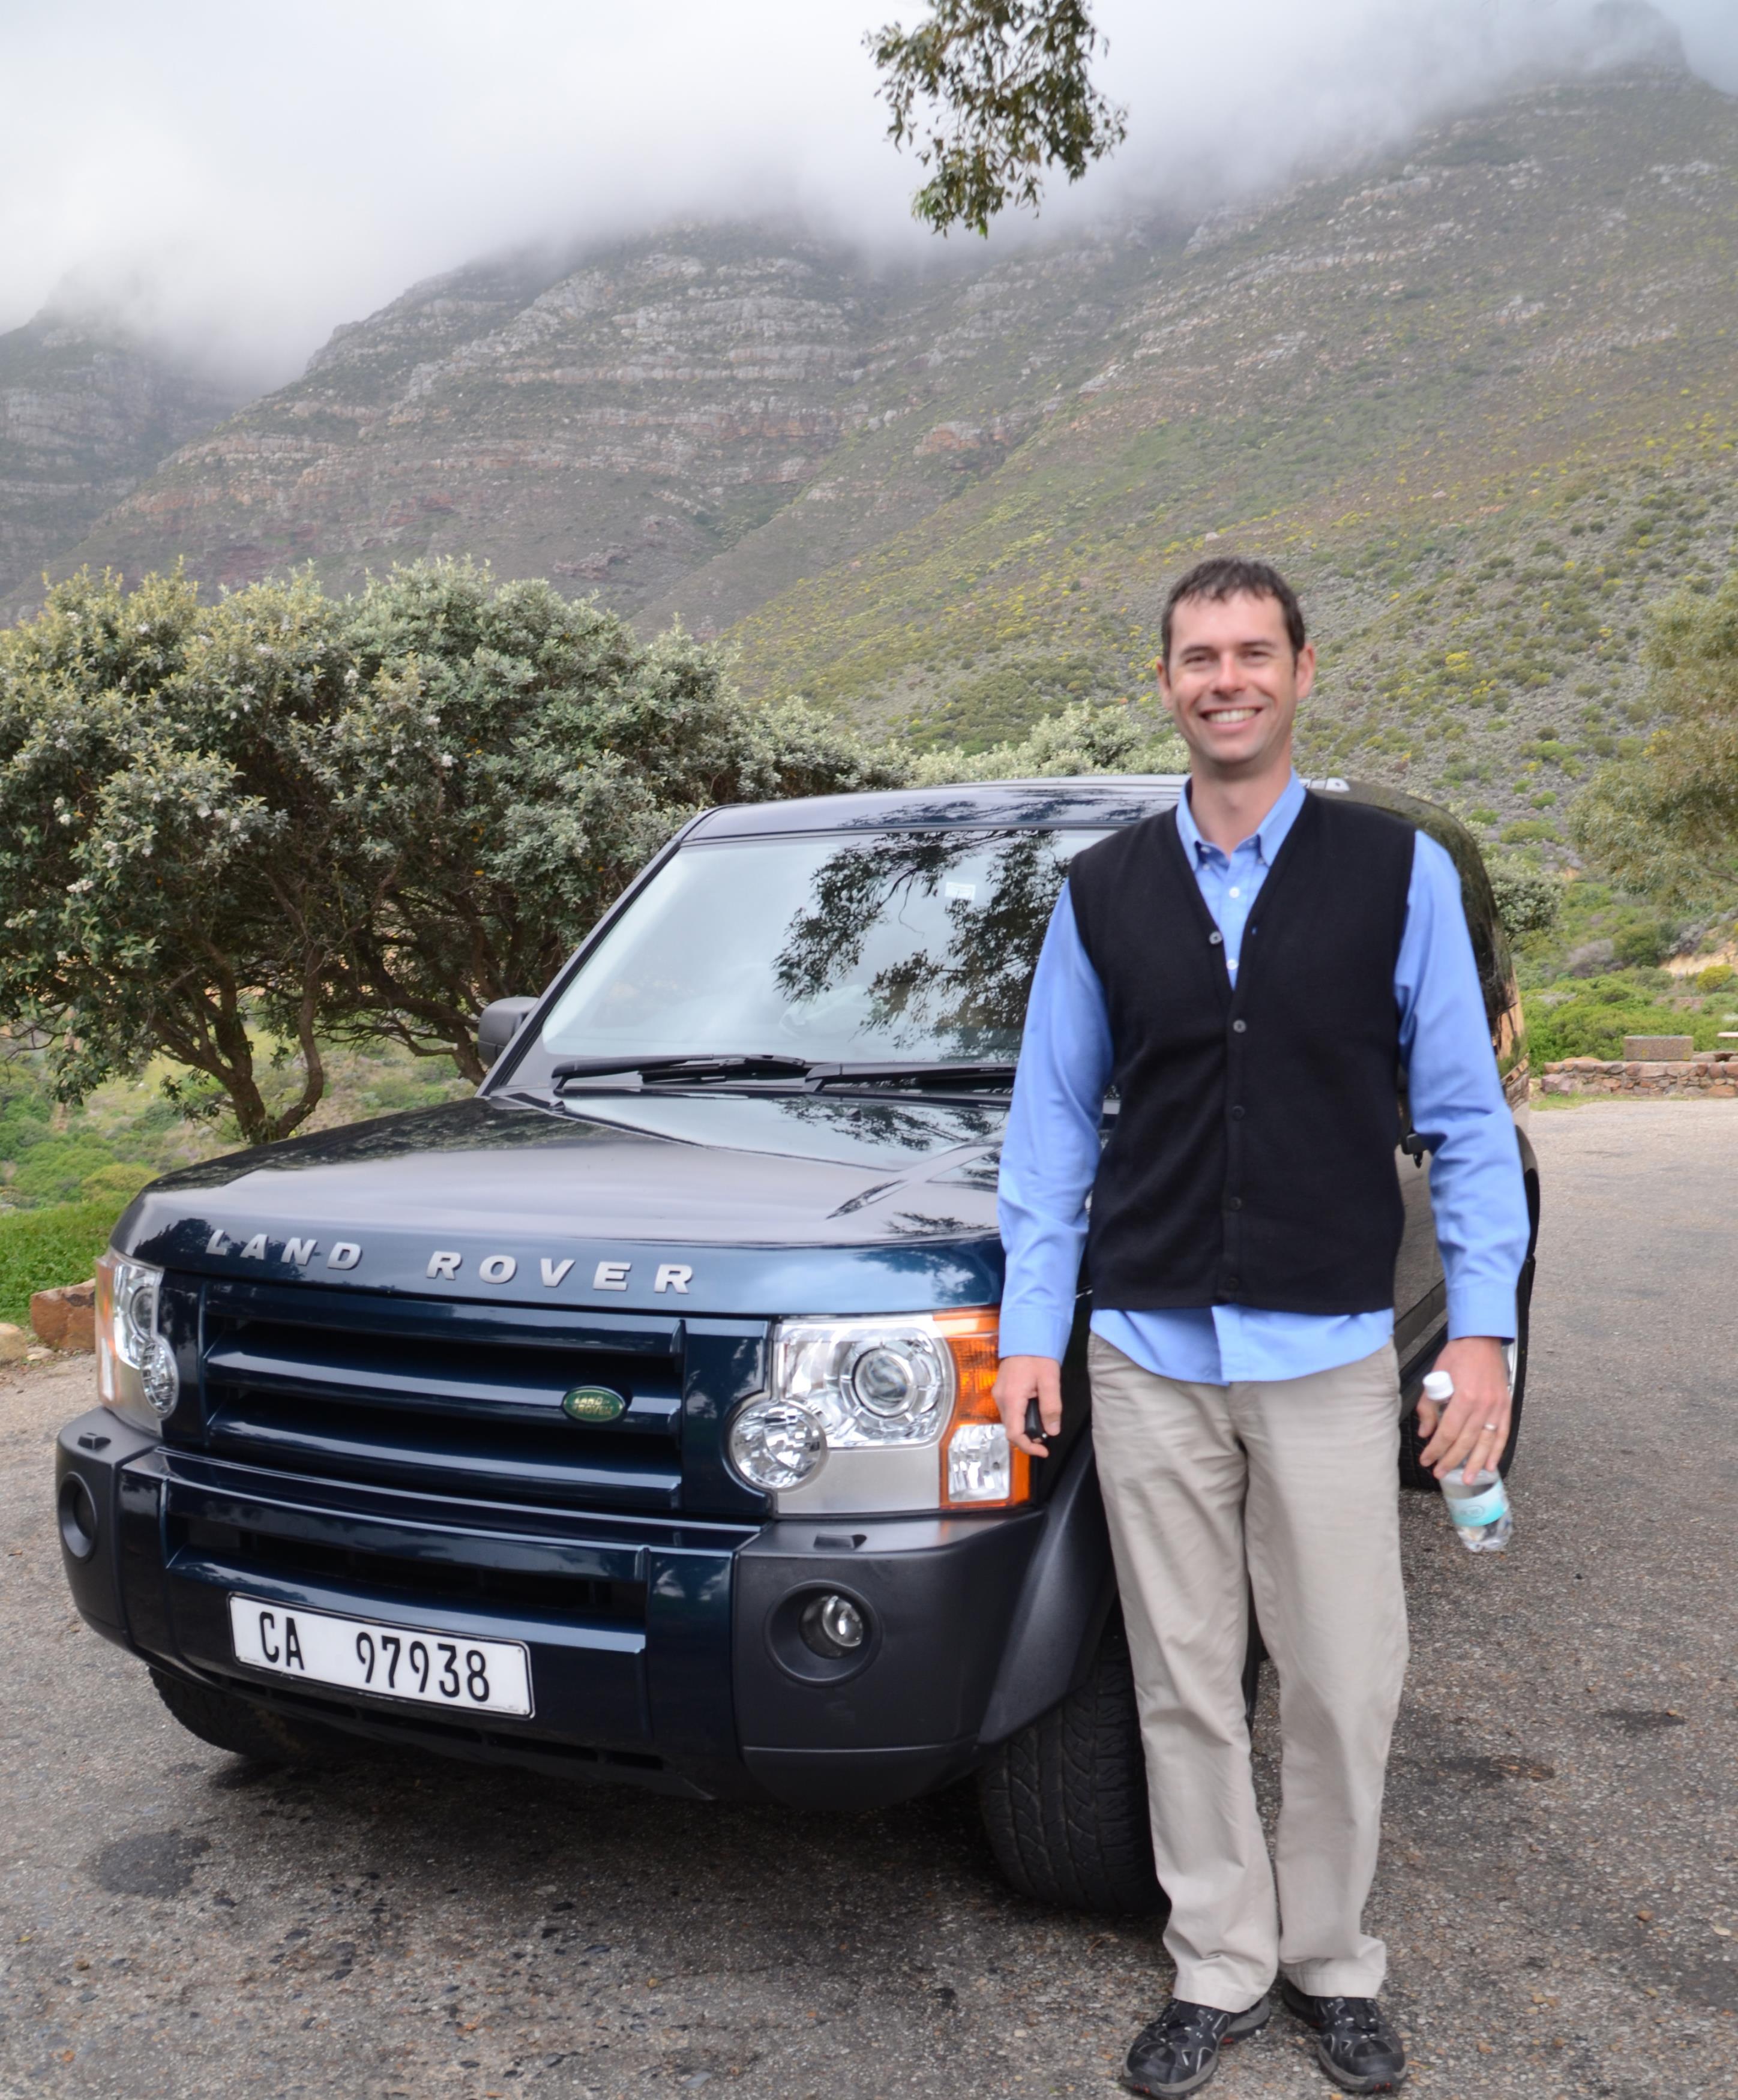 the cape town tour guide company services